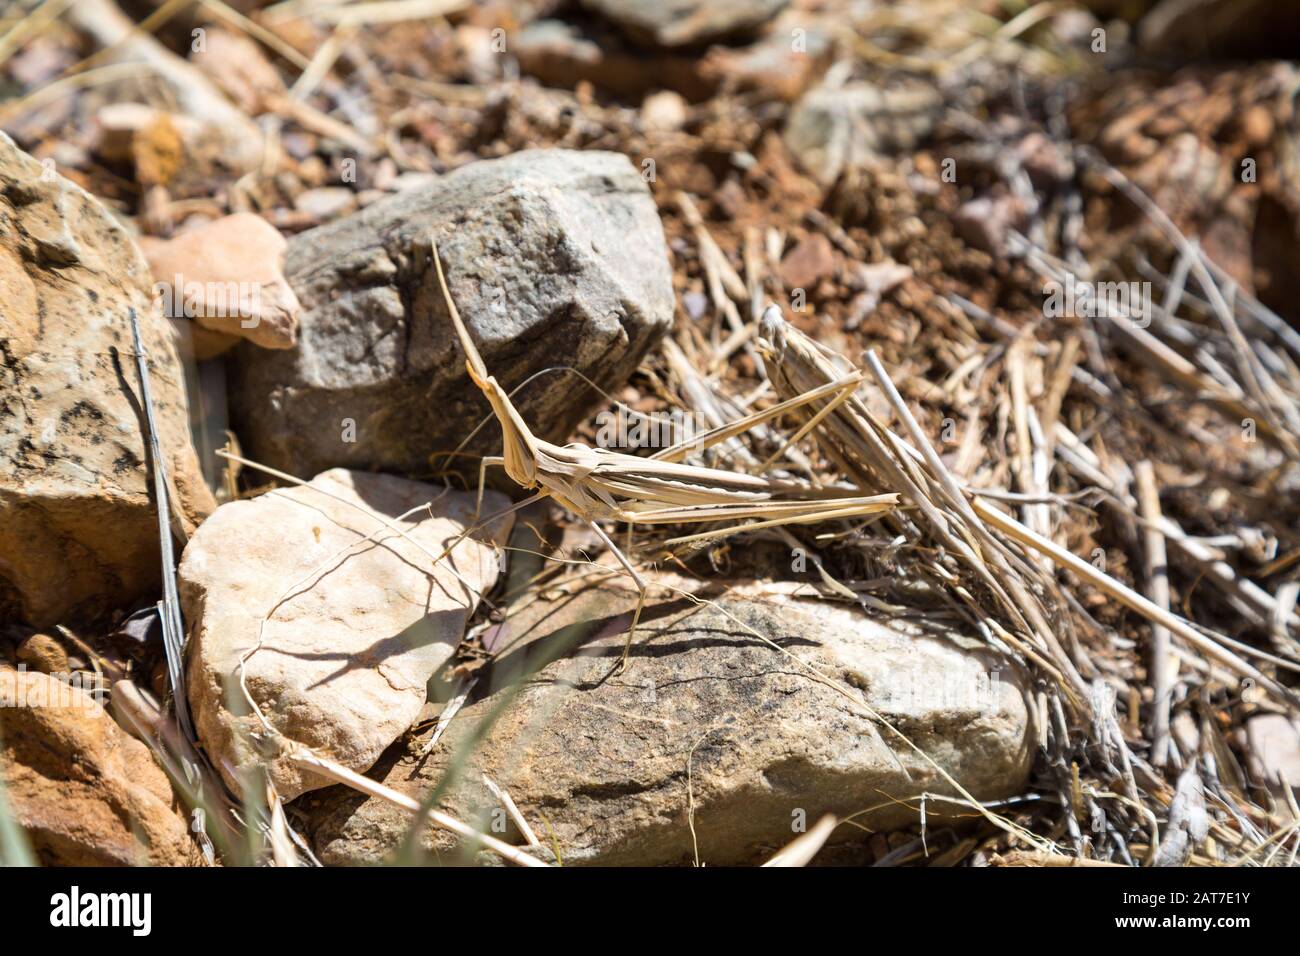 Well camouflaged brown cone-headed grasshopper (Acrida ungarica) on a stone, surrounded by dry grass, Namibia, Africa Stock Photo